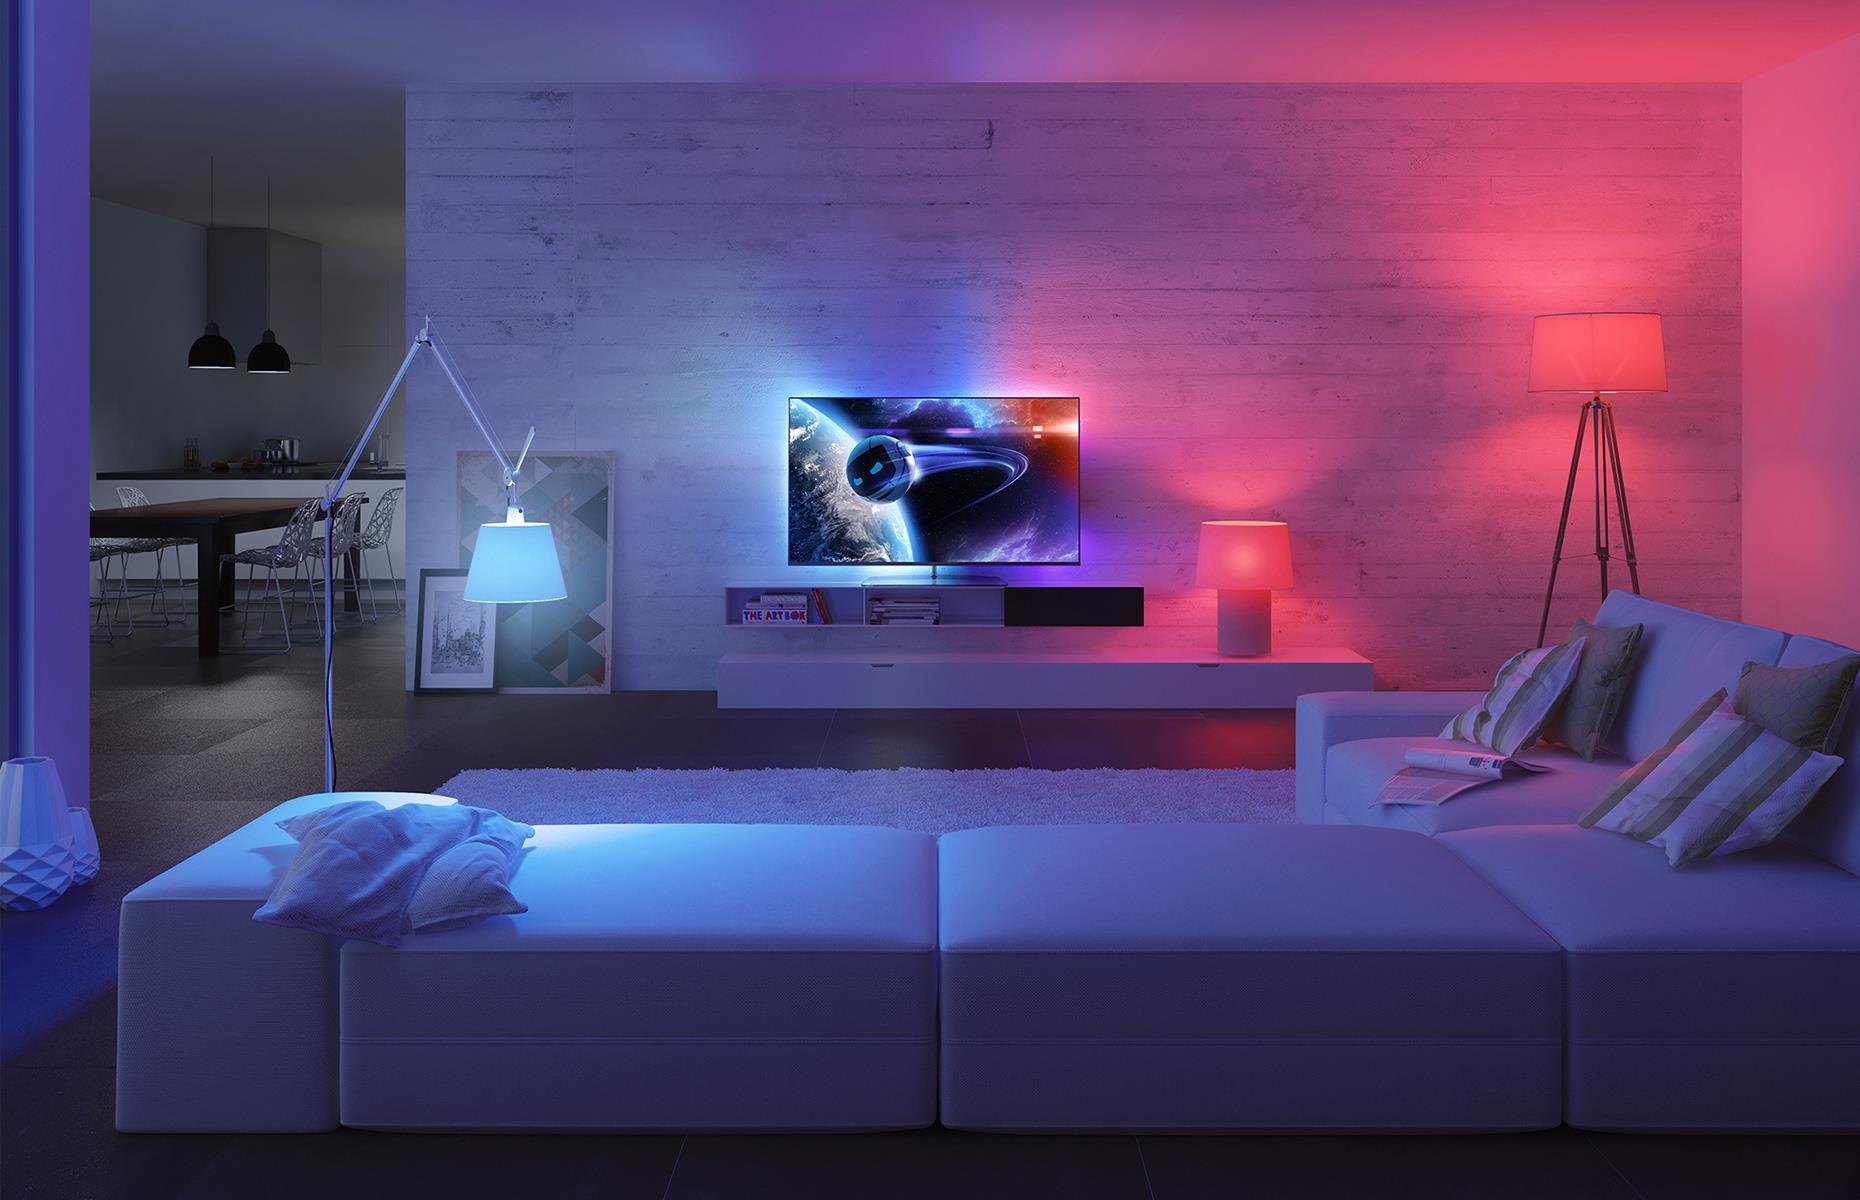 Colour your home with smart lighting